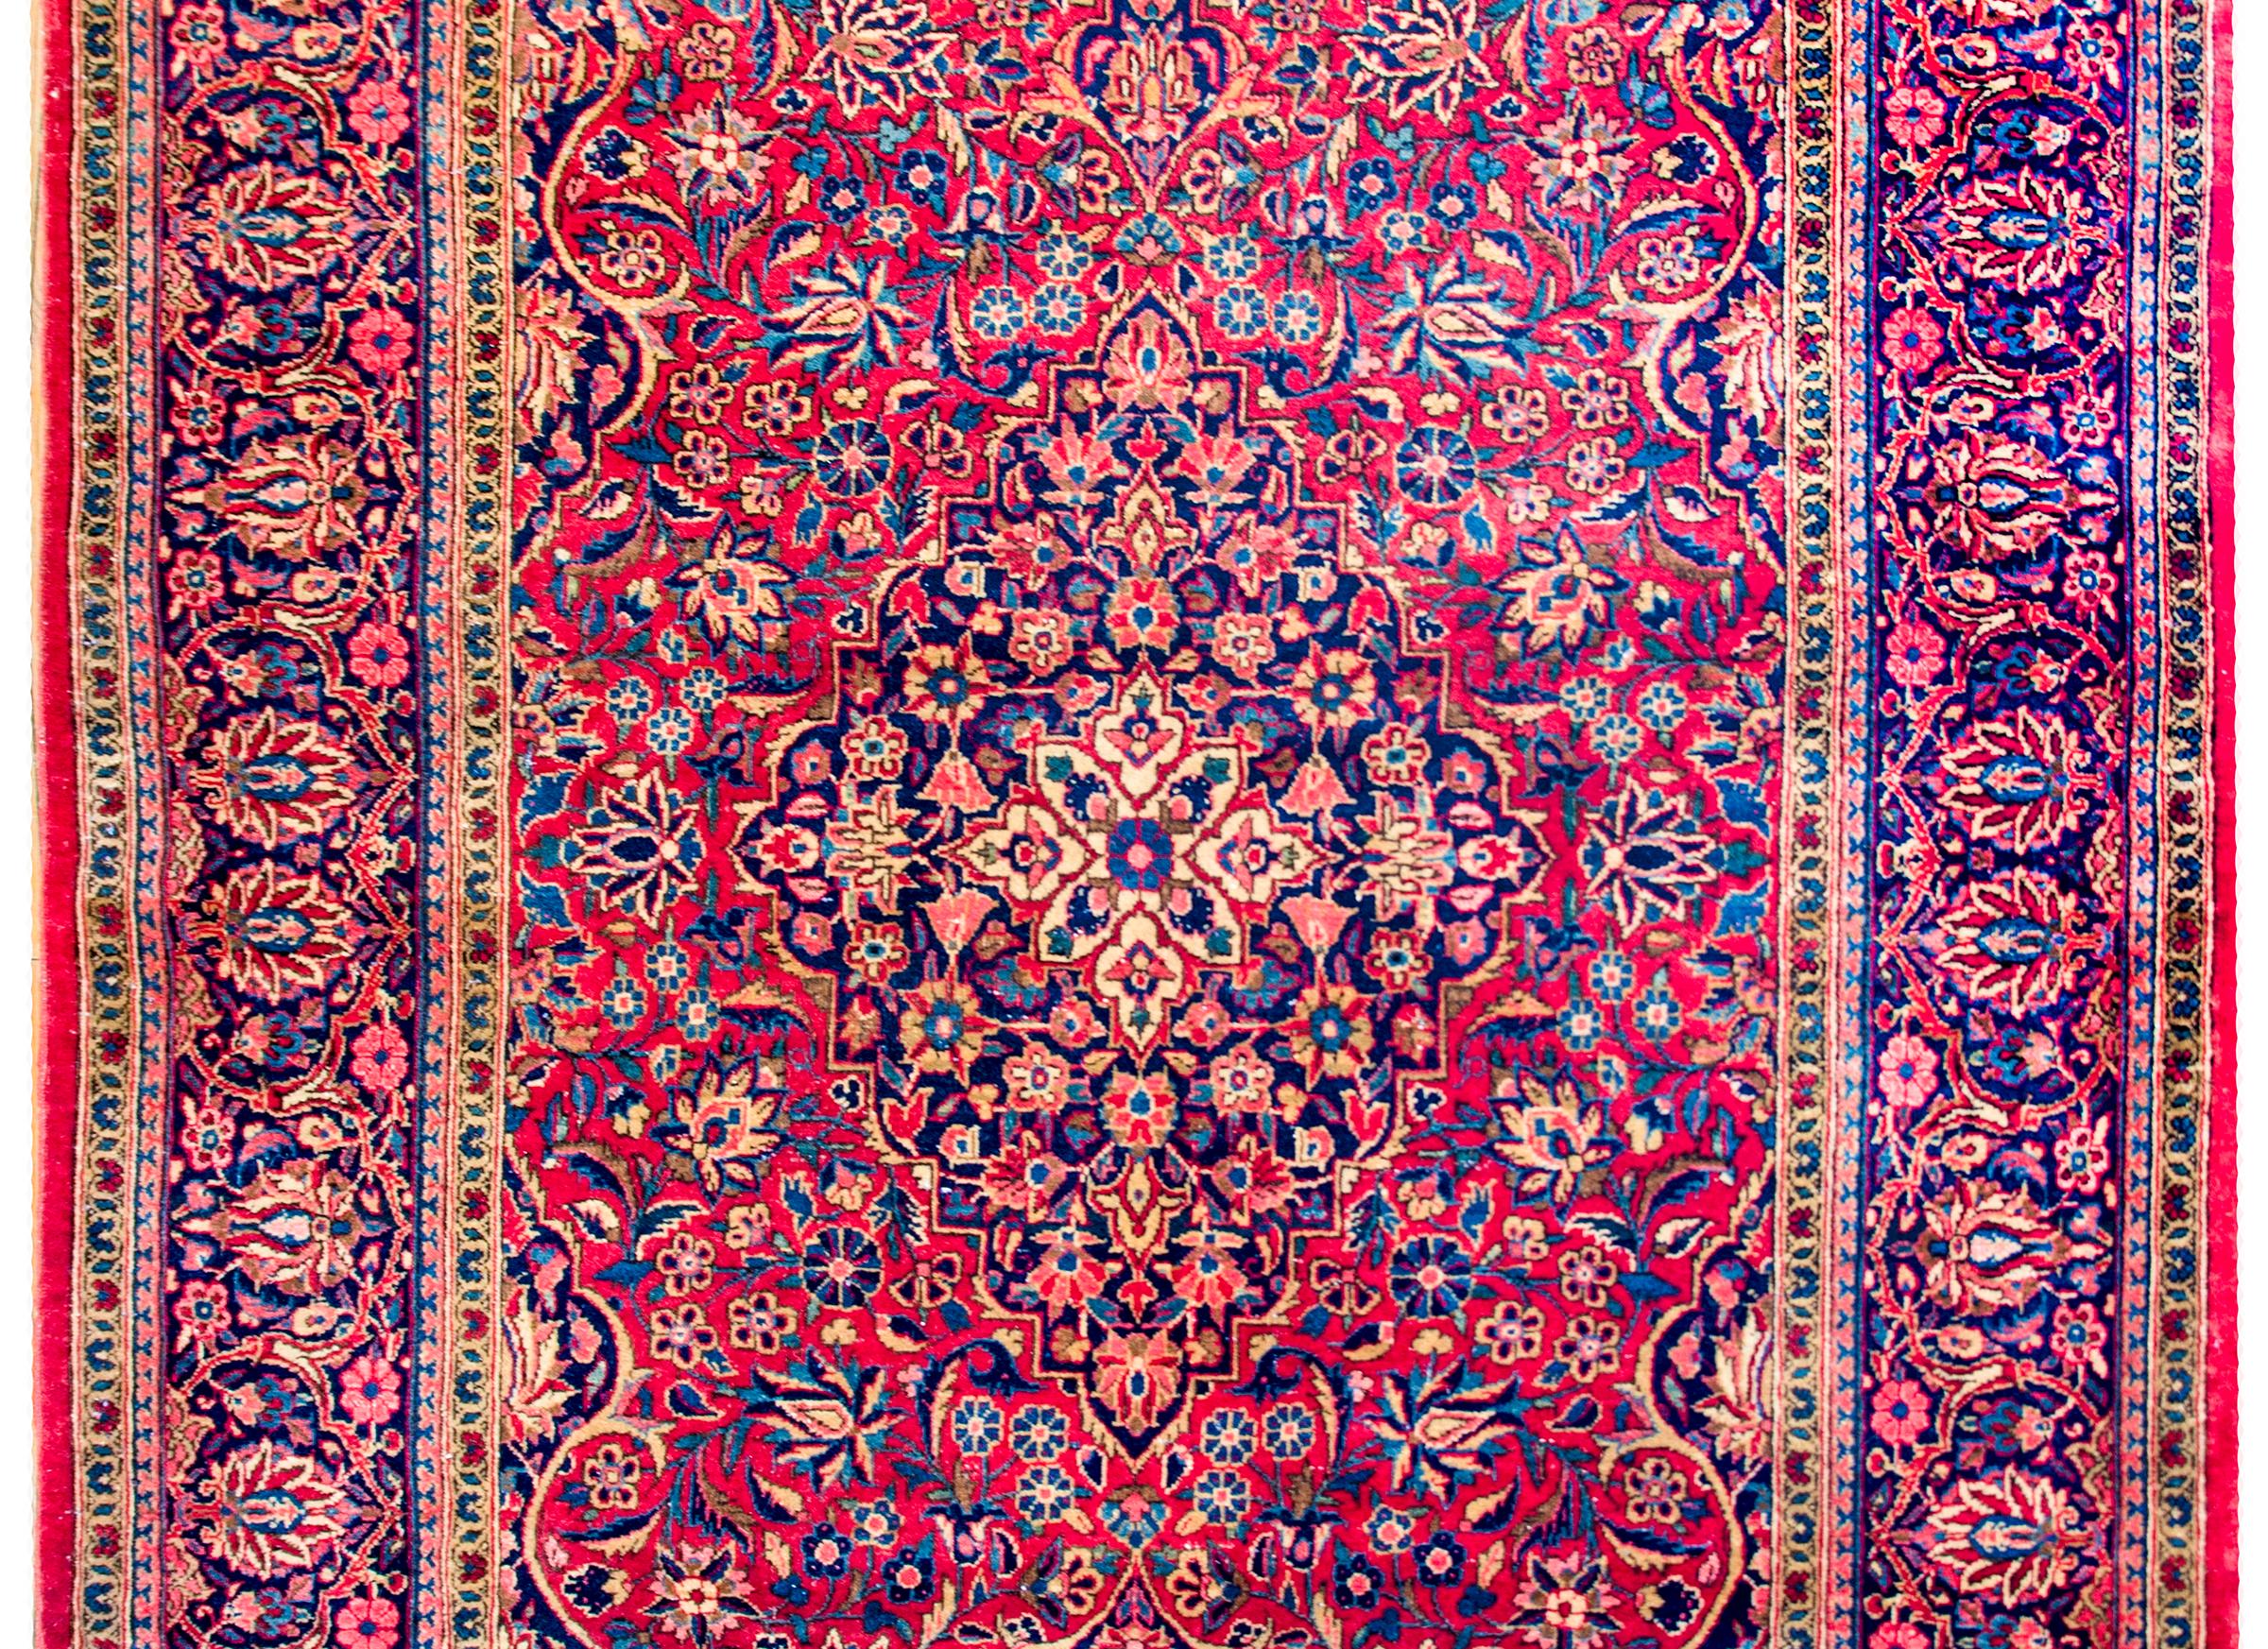 A gorgeous early 20th century Persian Kashan rug with an all-over pattern of myriad flowers and scrolling vines woven in light and dark indigo, cream, pink, and crimson on a rich crimson background. The border is extraordinary with a wide central